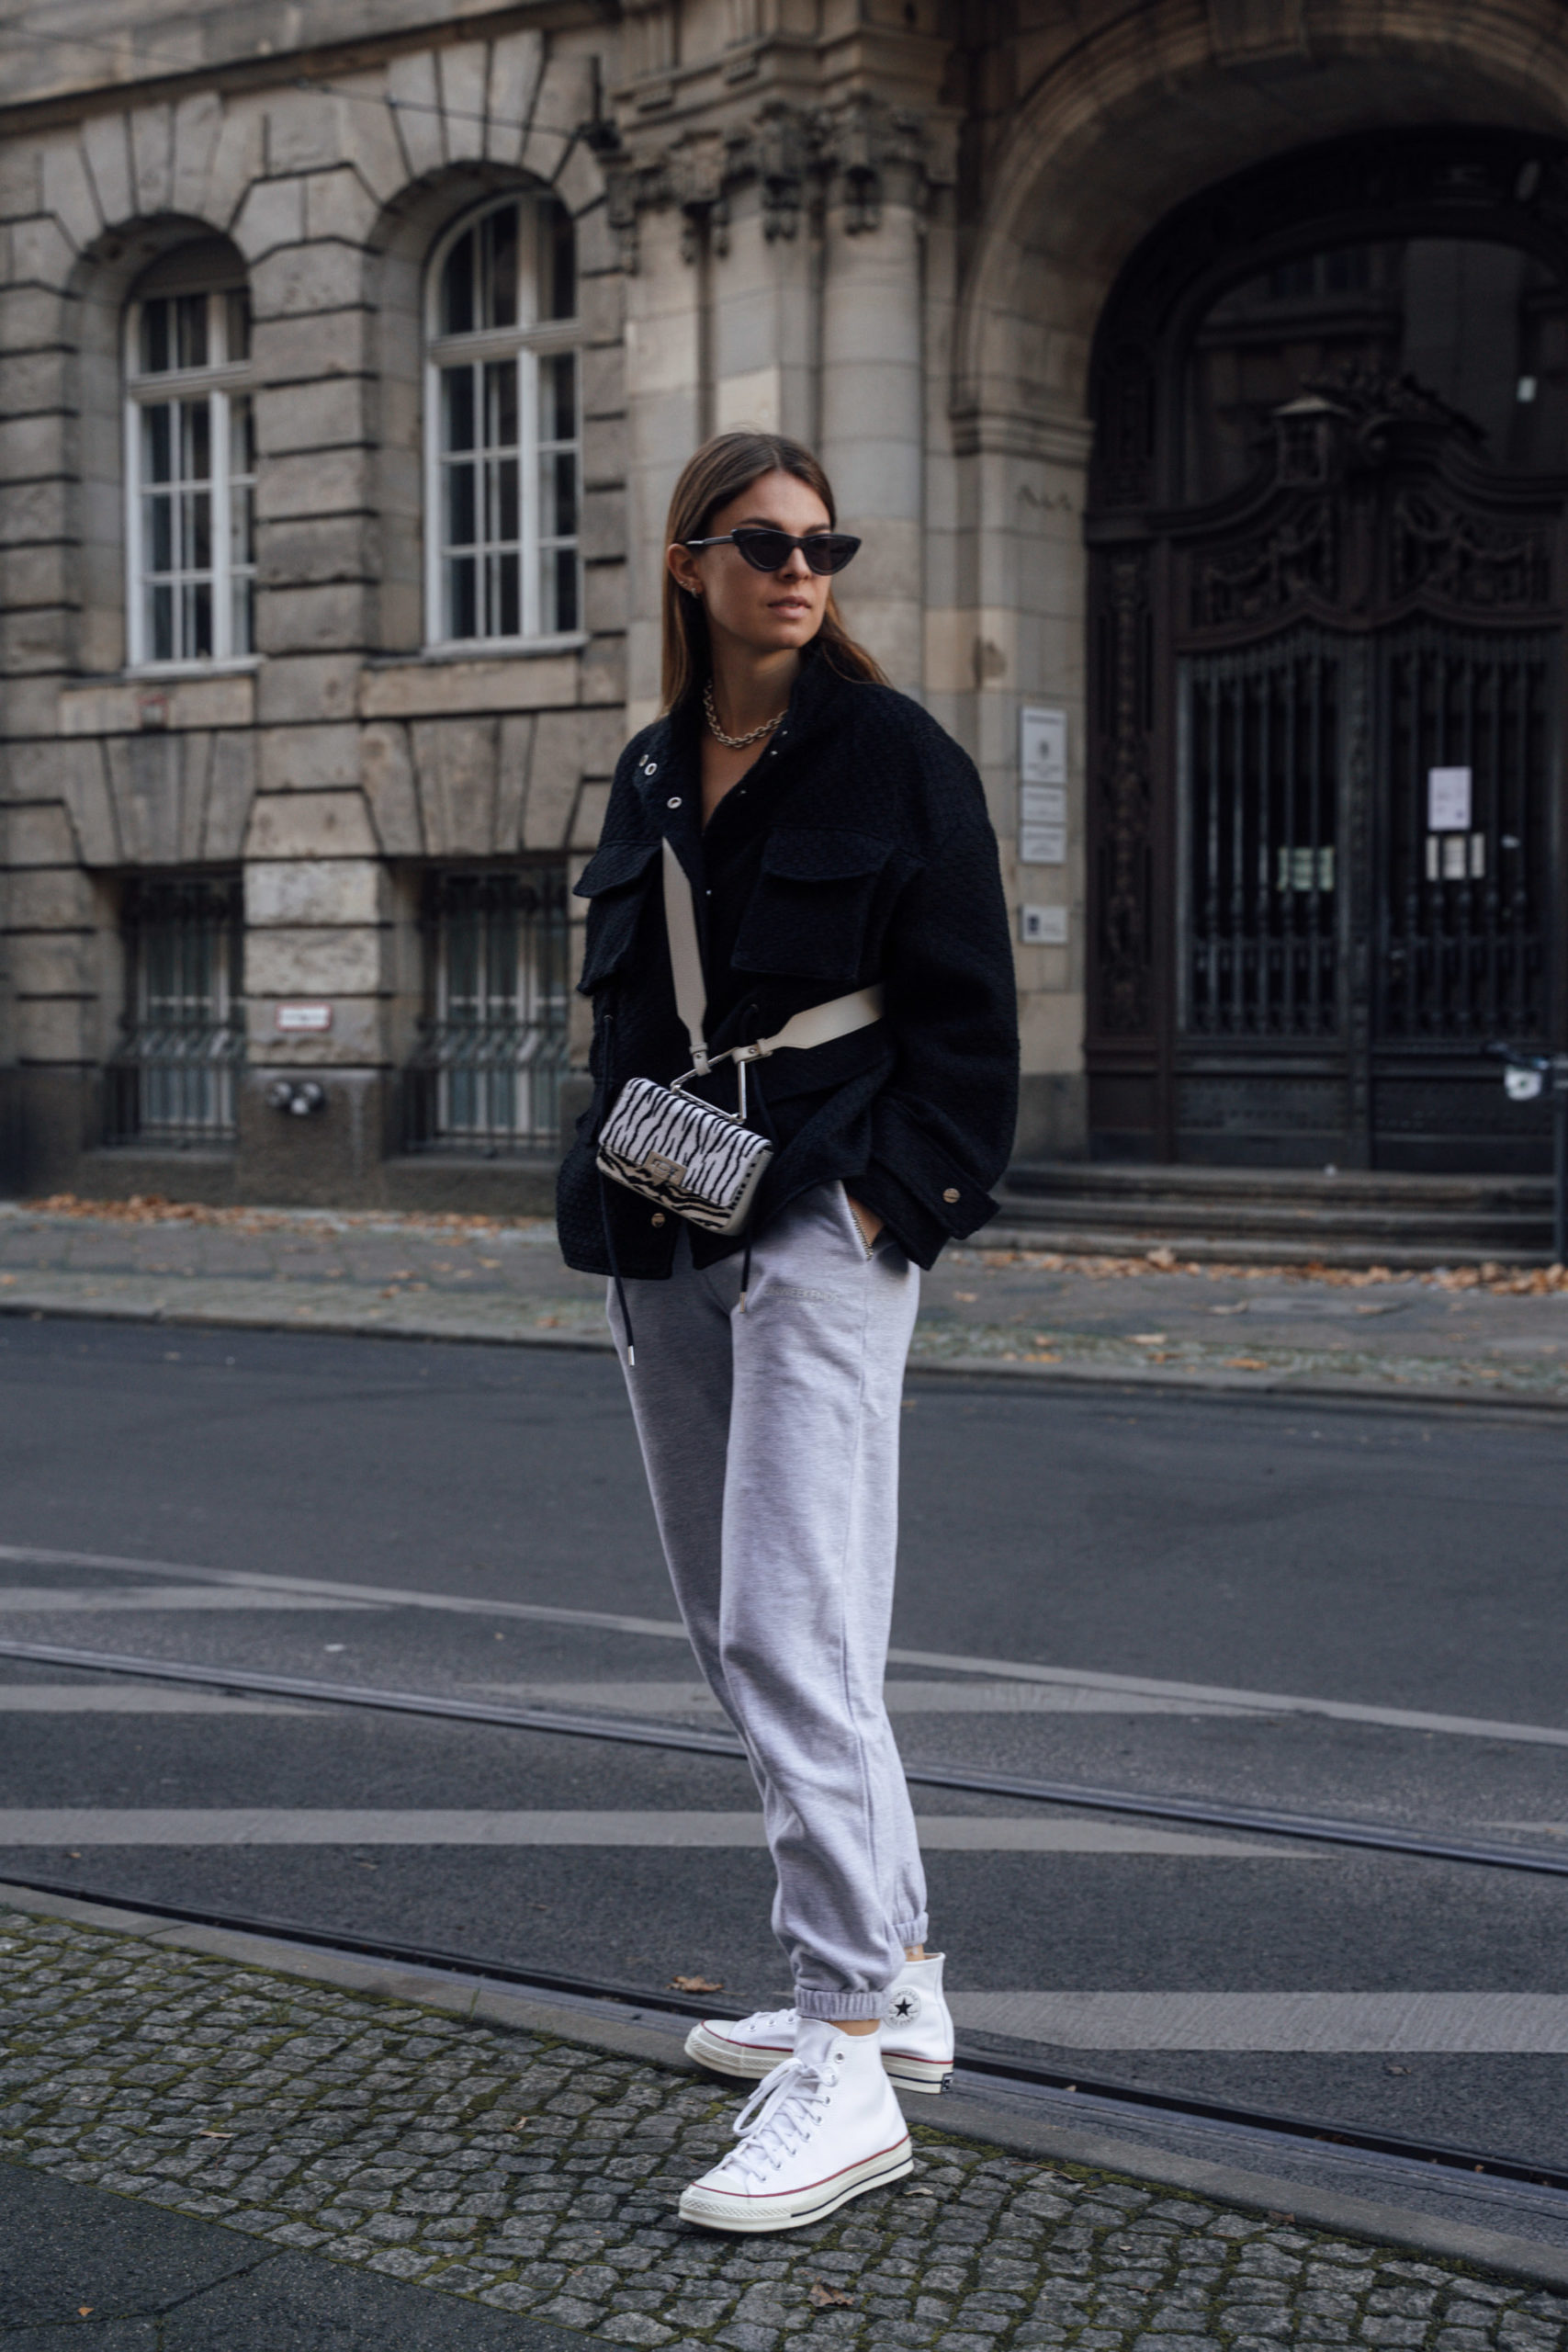 Outfit ideas for the sweatpants trend 2021 - How to wear sweatpants